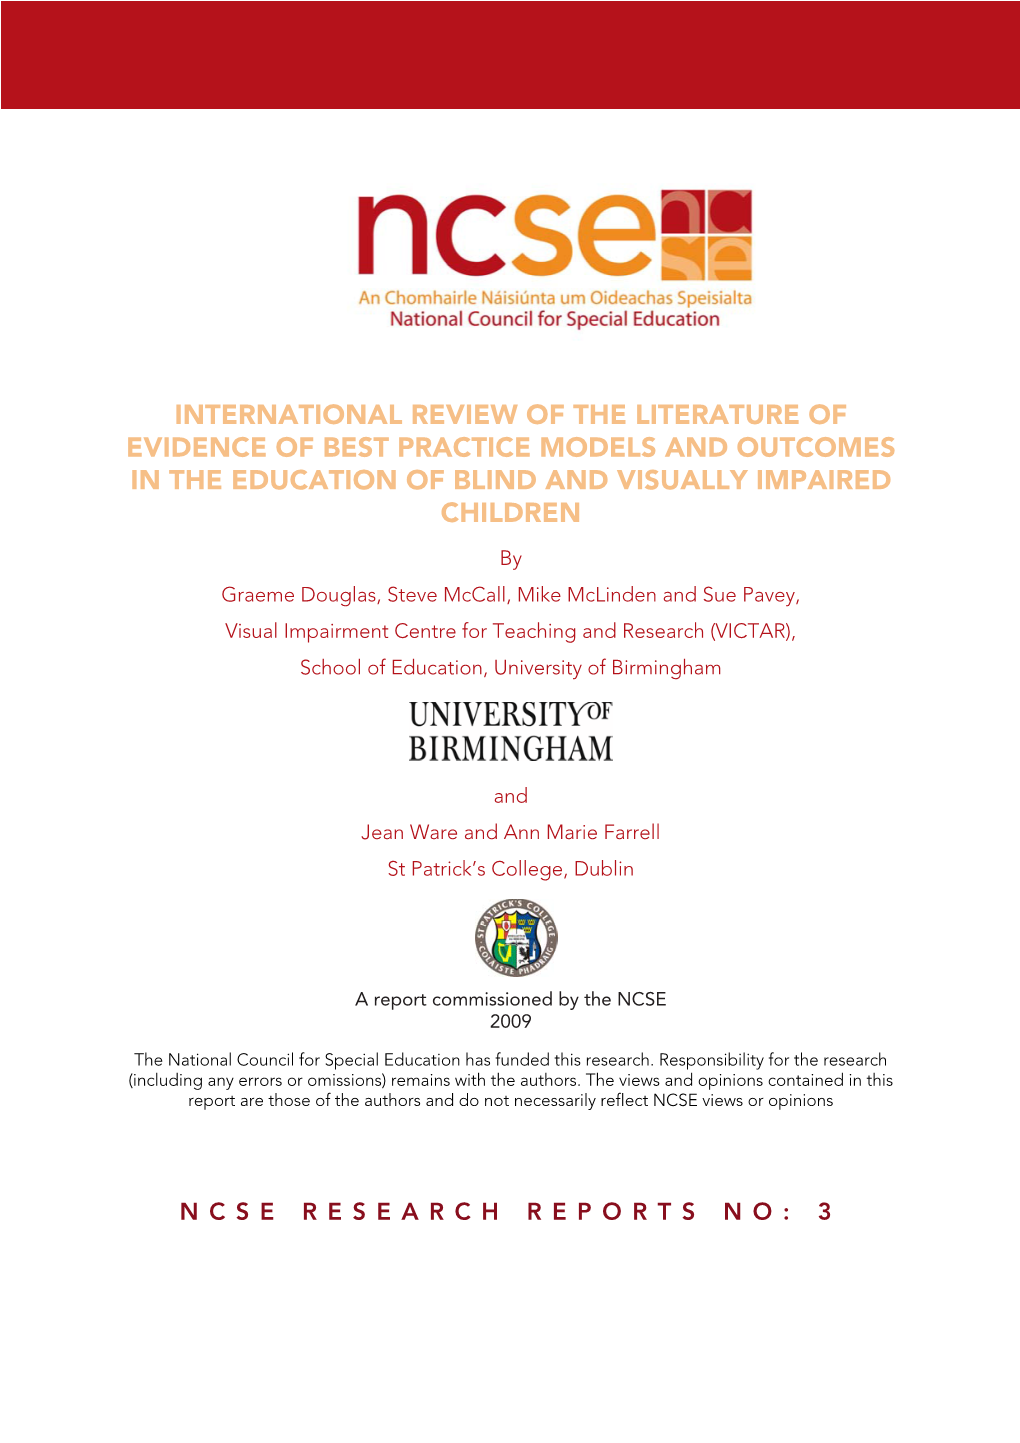 International Review of the Literature of Evidence of Best Practice Models and Outcomes in the Education of Blind and Visually Impaired Children